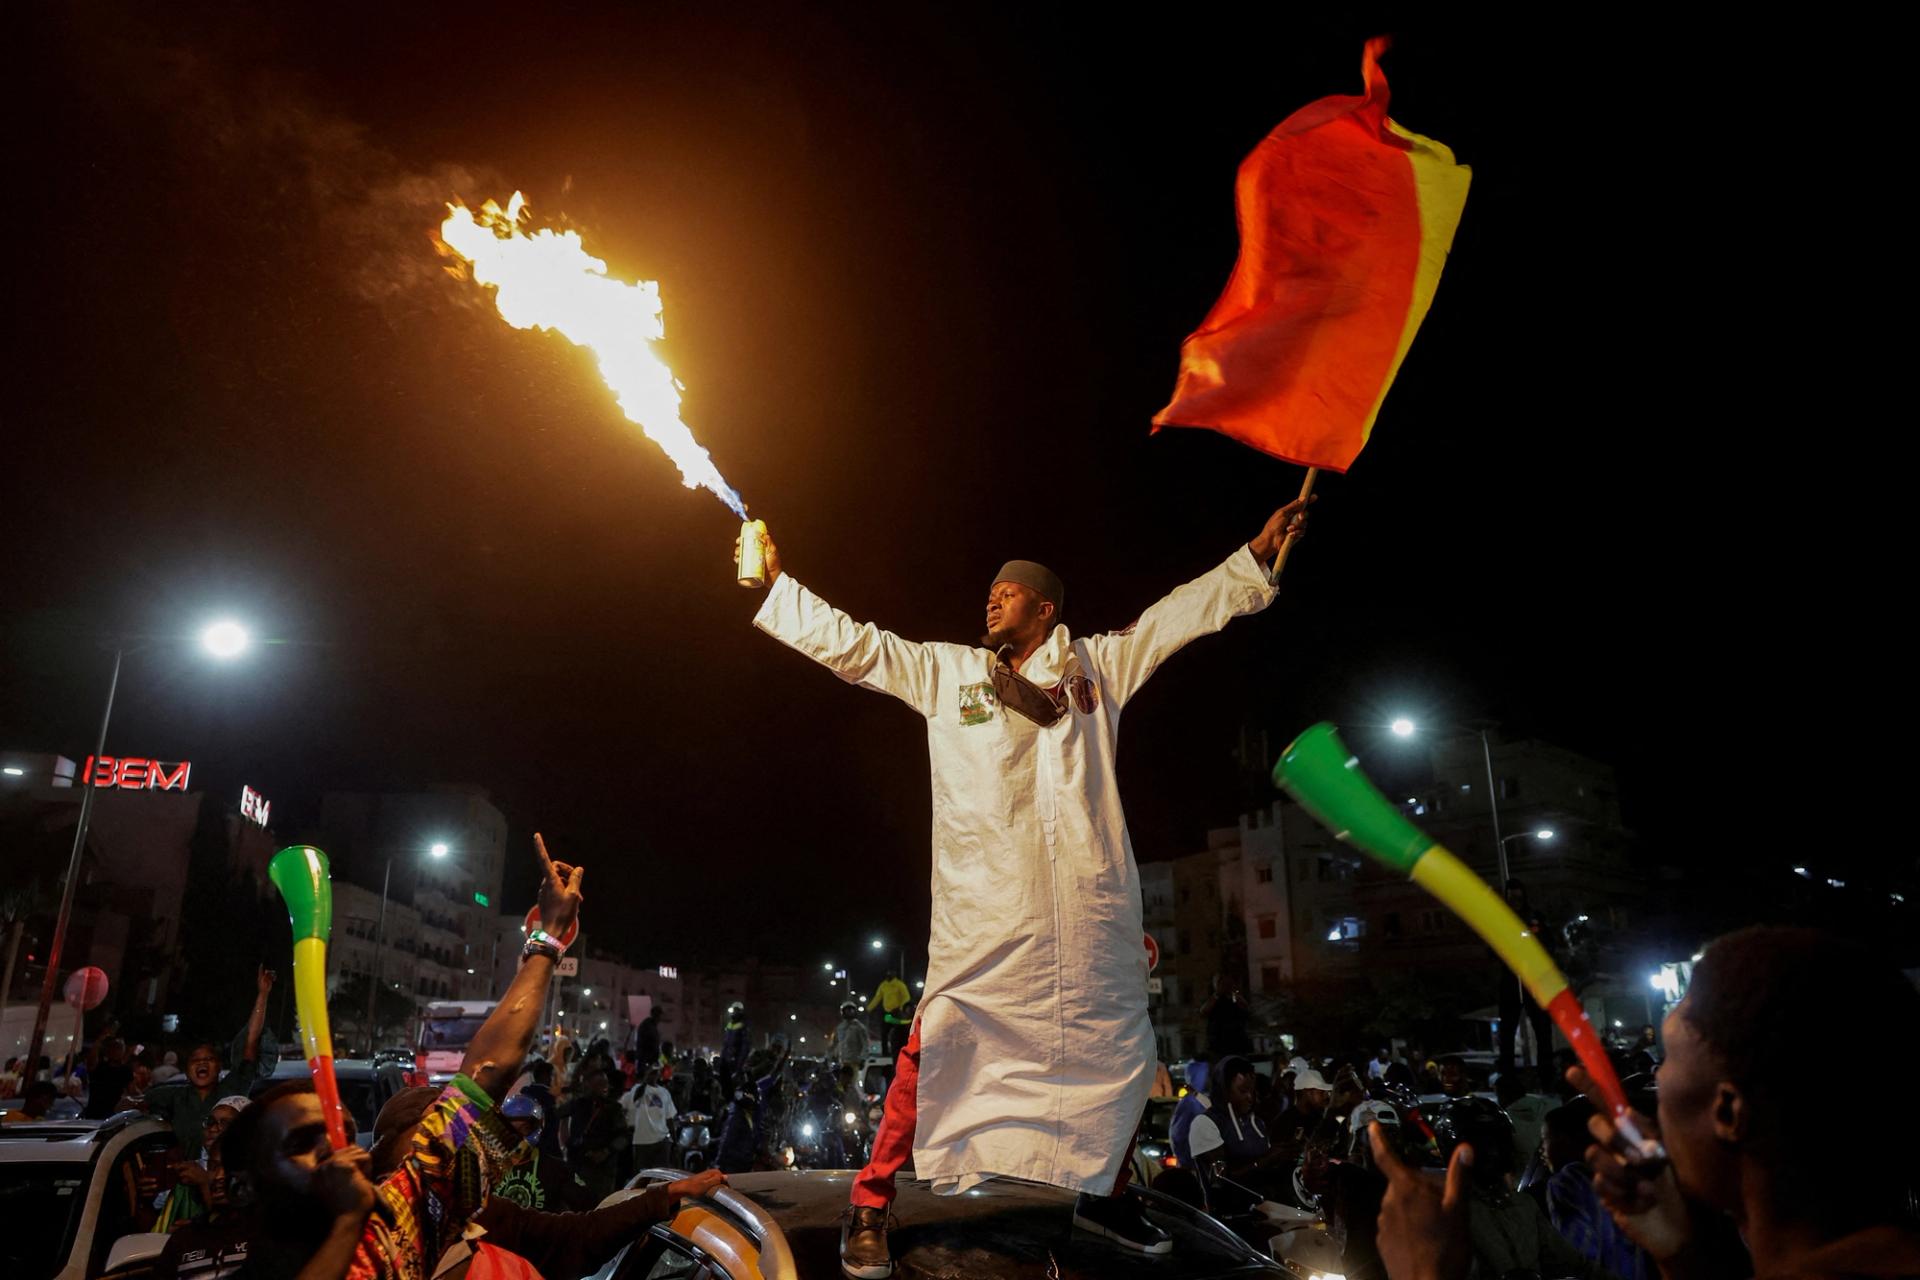 A supporter celebrates after Senegalese opposition leader Ousmane Sonko and the presidential candidate he is backing in the March 24 election, Bassirou Diomaye Faye were released from prison, in Dakar, Senegal March 14, 2024